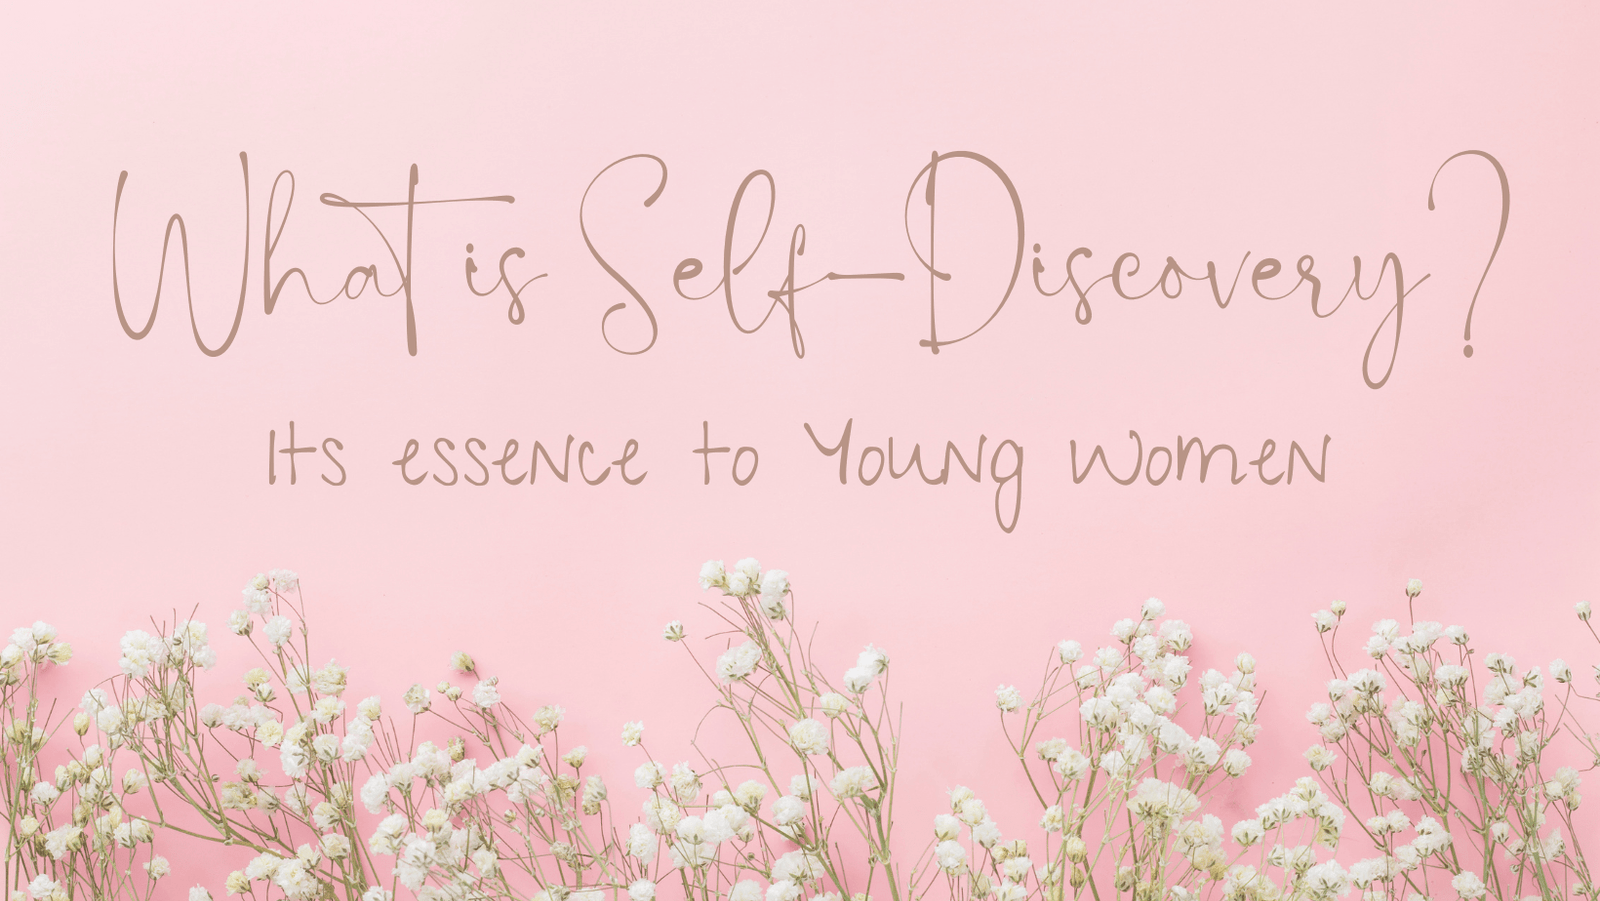 The Essence of Self-Discovery to Young Women